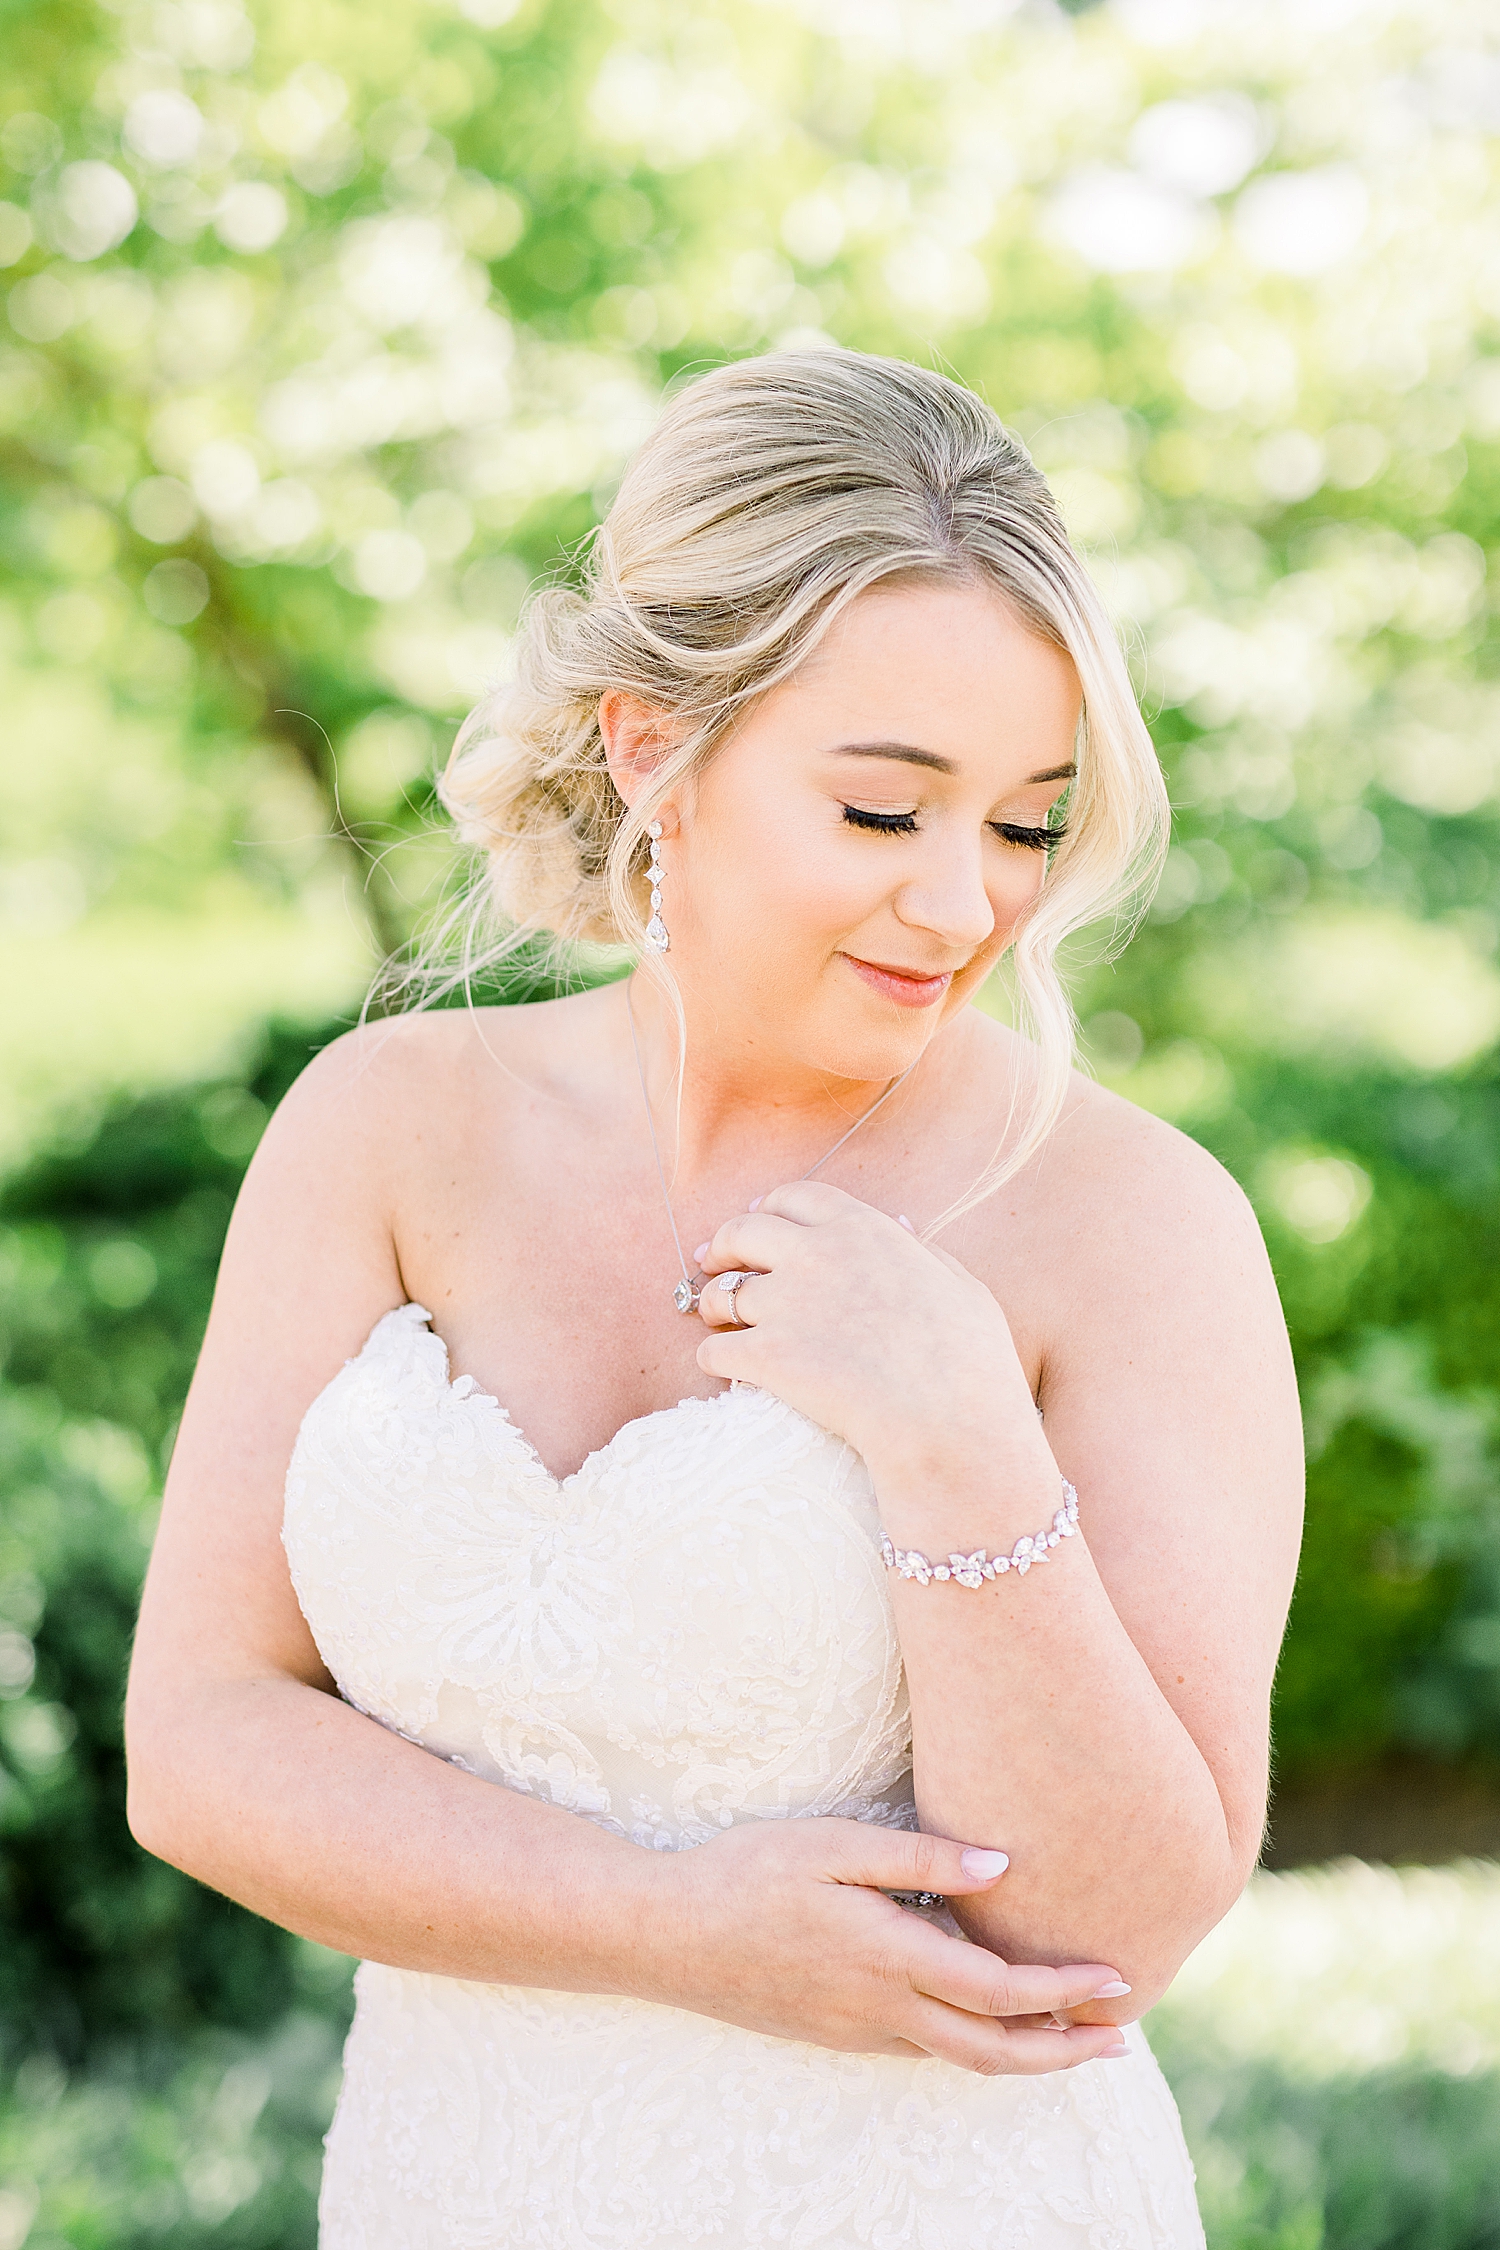 bride looks over shoulder holding tendril of hair